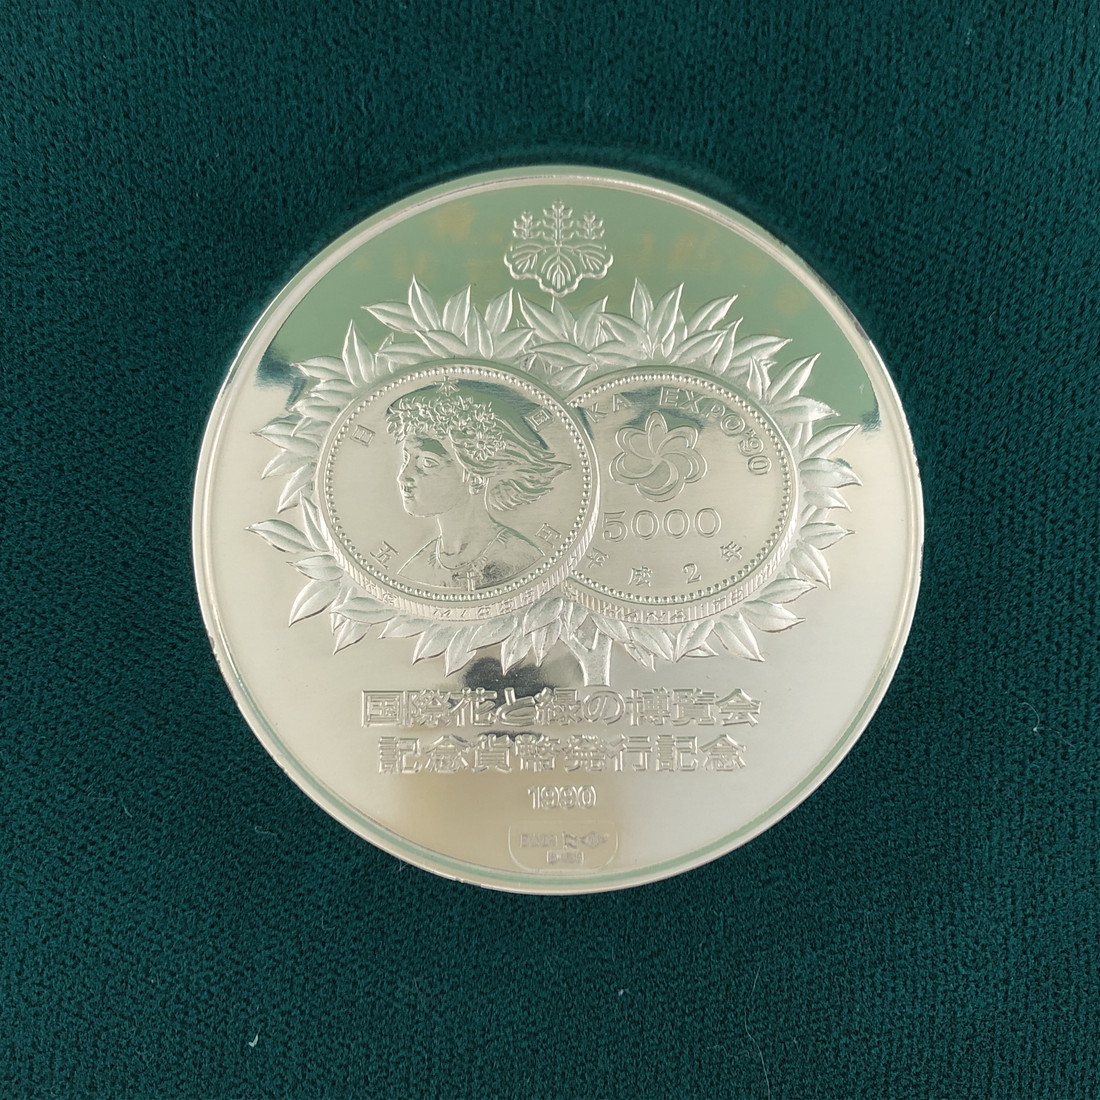  international flower . green. . viewing . memory money issue memory medal ( original silver made ) silver medal memory coin 